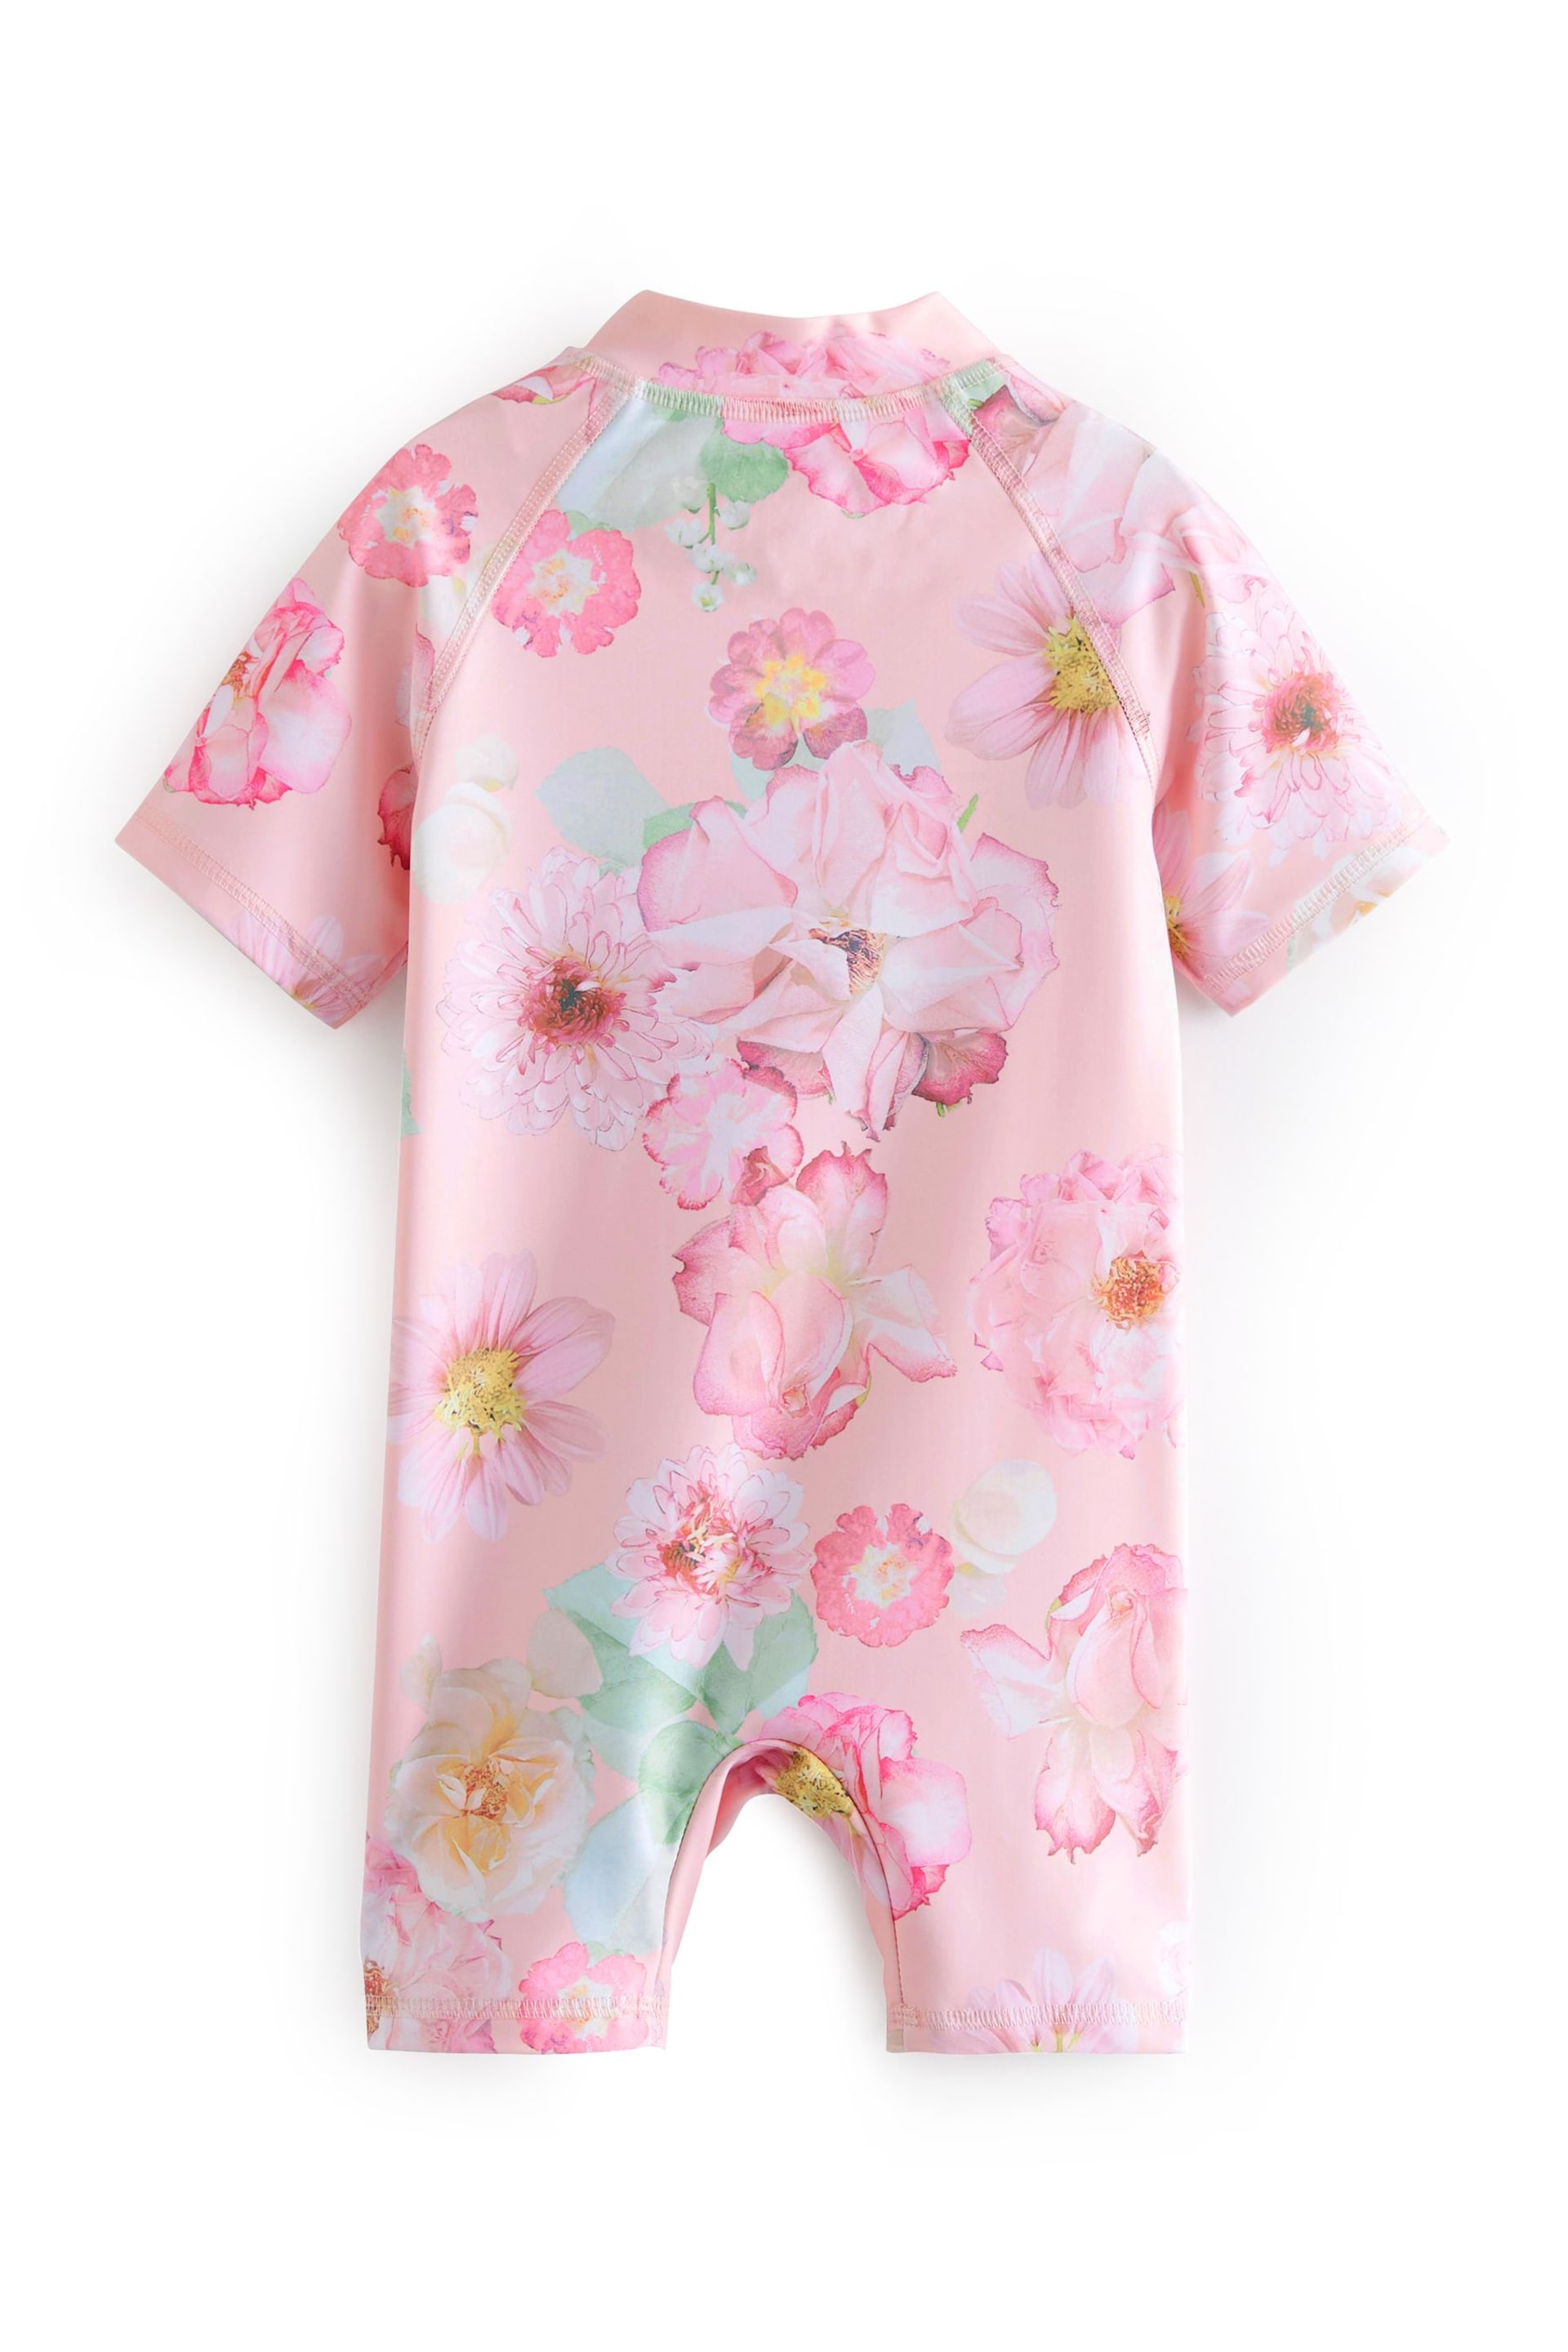 Pink Floral Sunsafe Swimsuit (3mths-7yrs) - Image 8 of 9